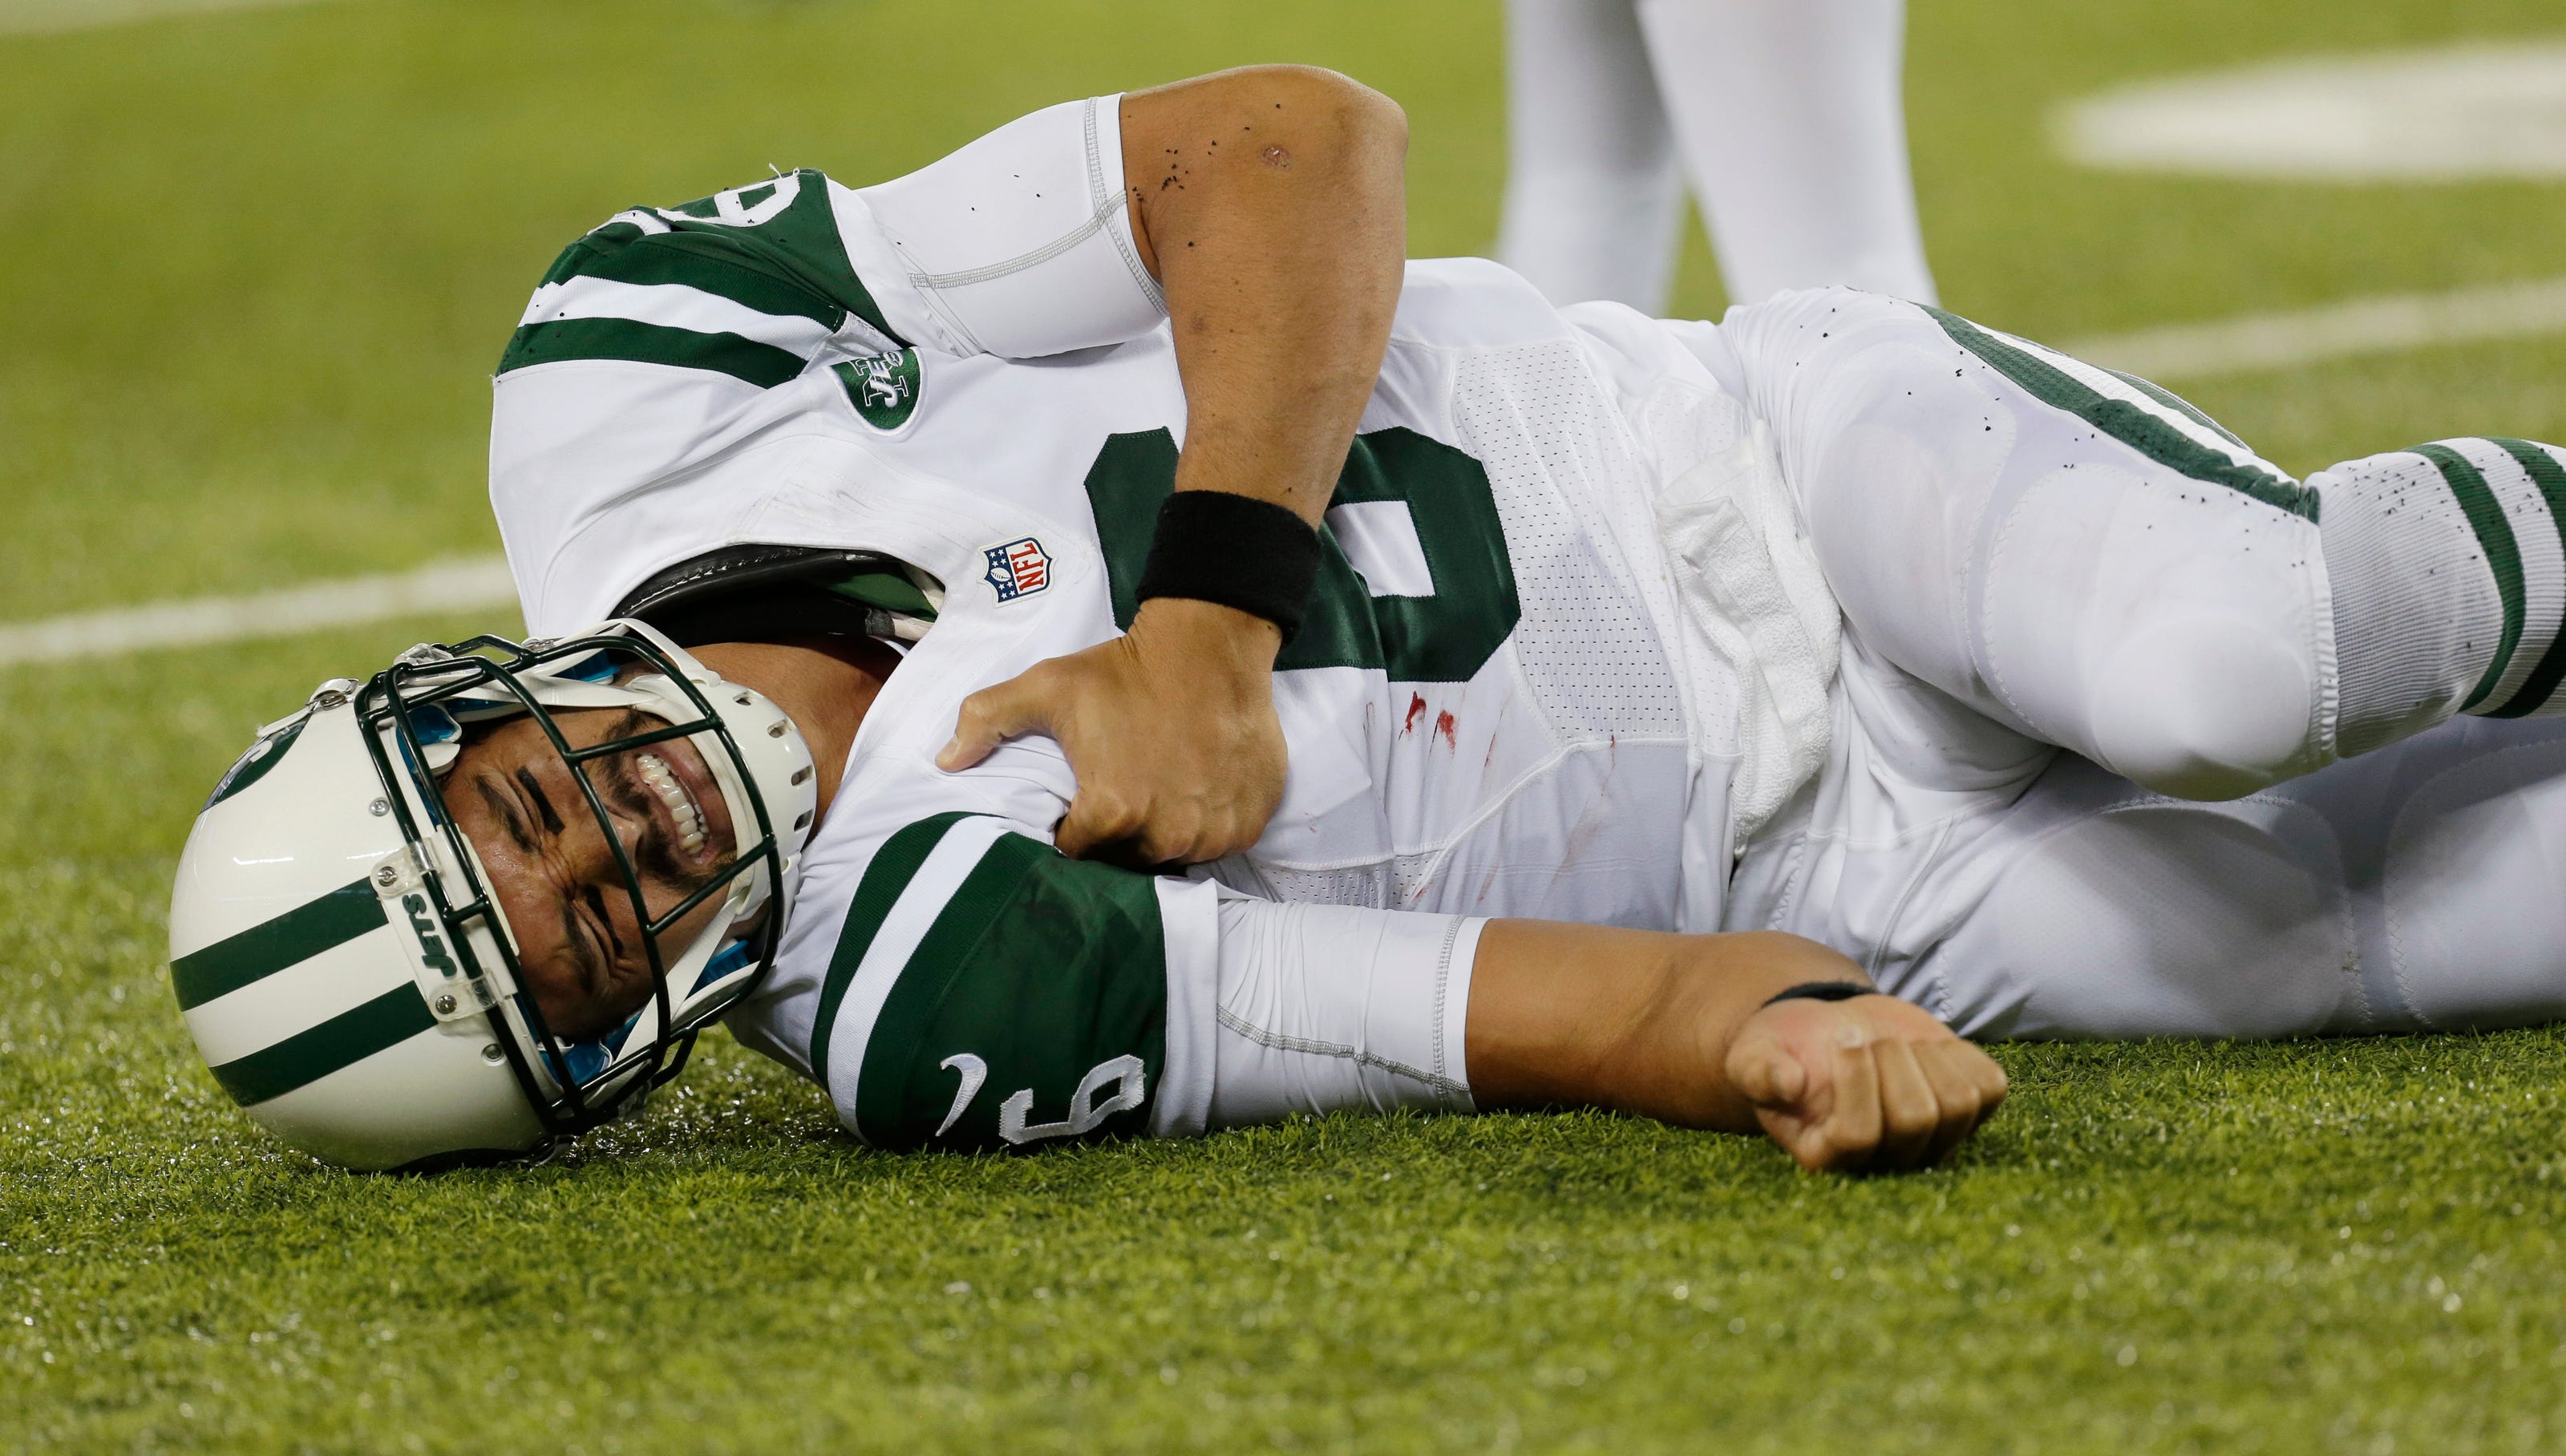 Rex Ryan's blunder leaves Jets' QB situation in chaos